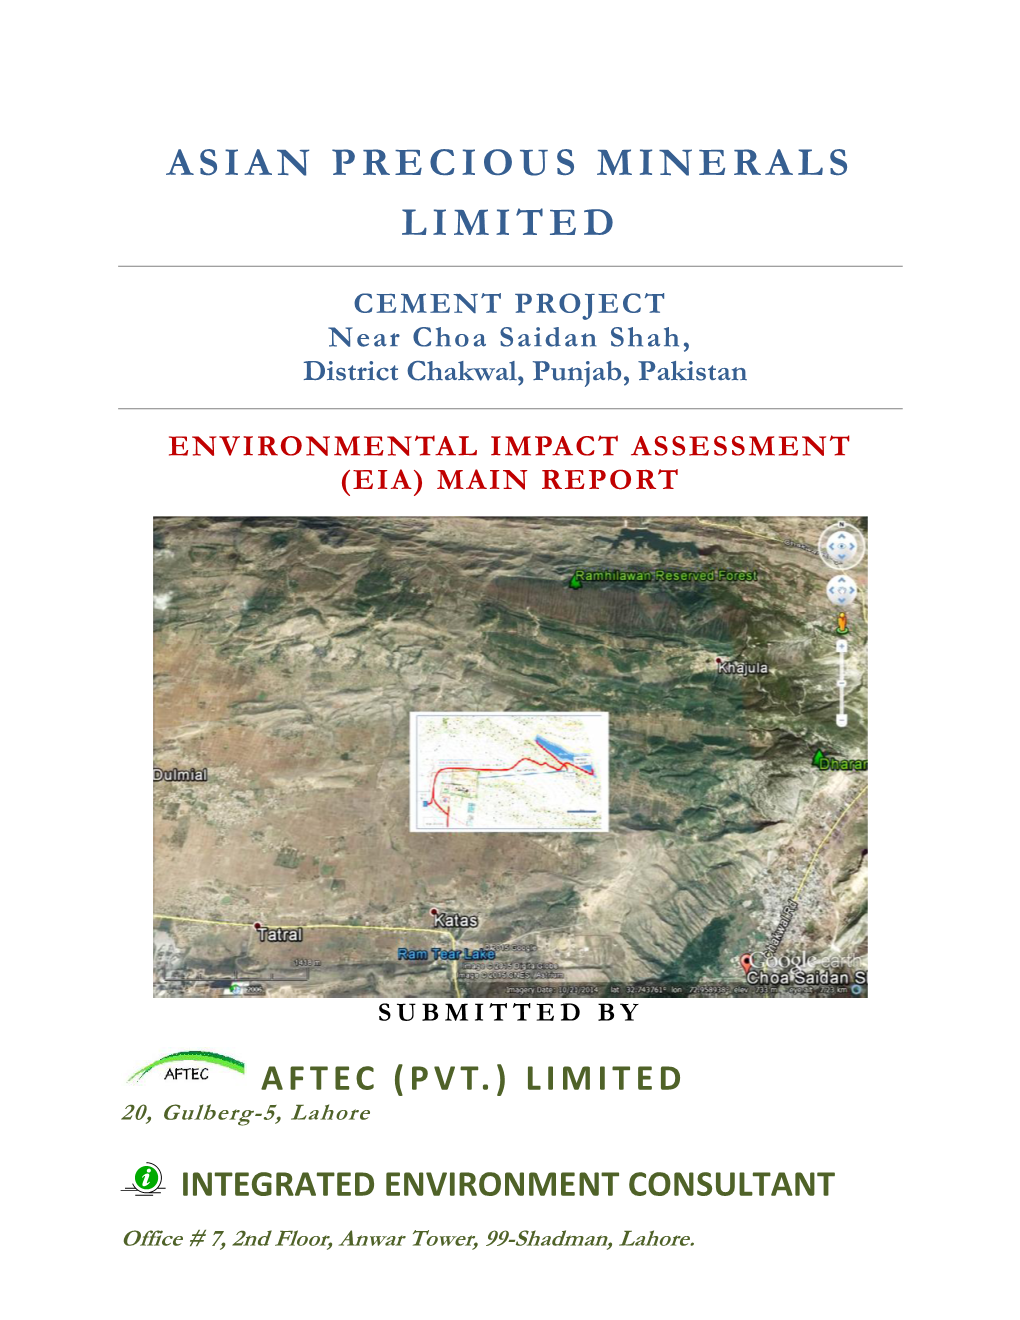 Asian Precious Minerals Limited – Eia Report Cement Project Table of Contents